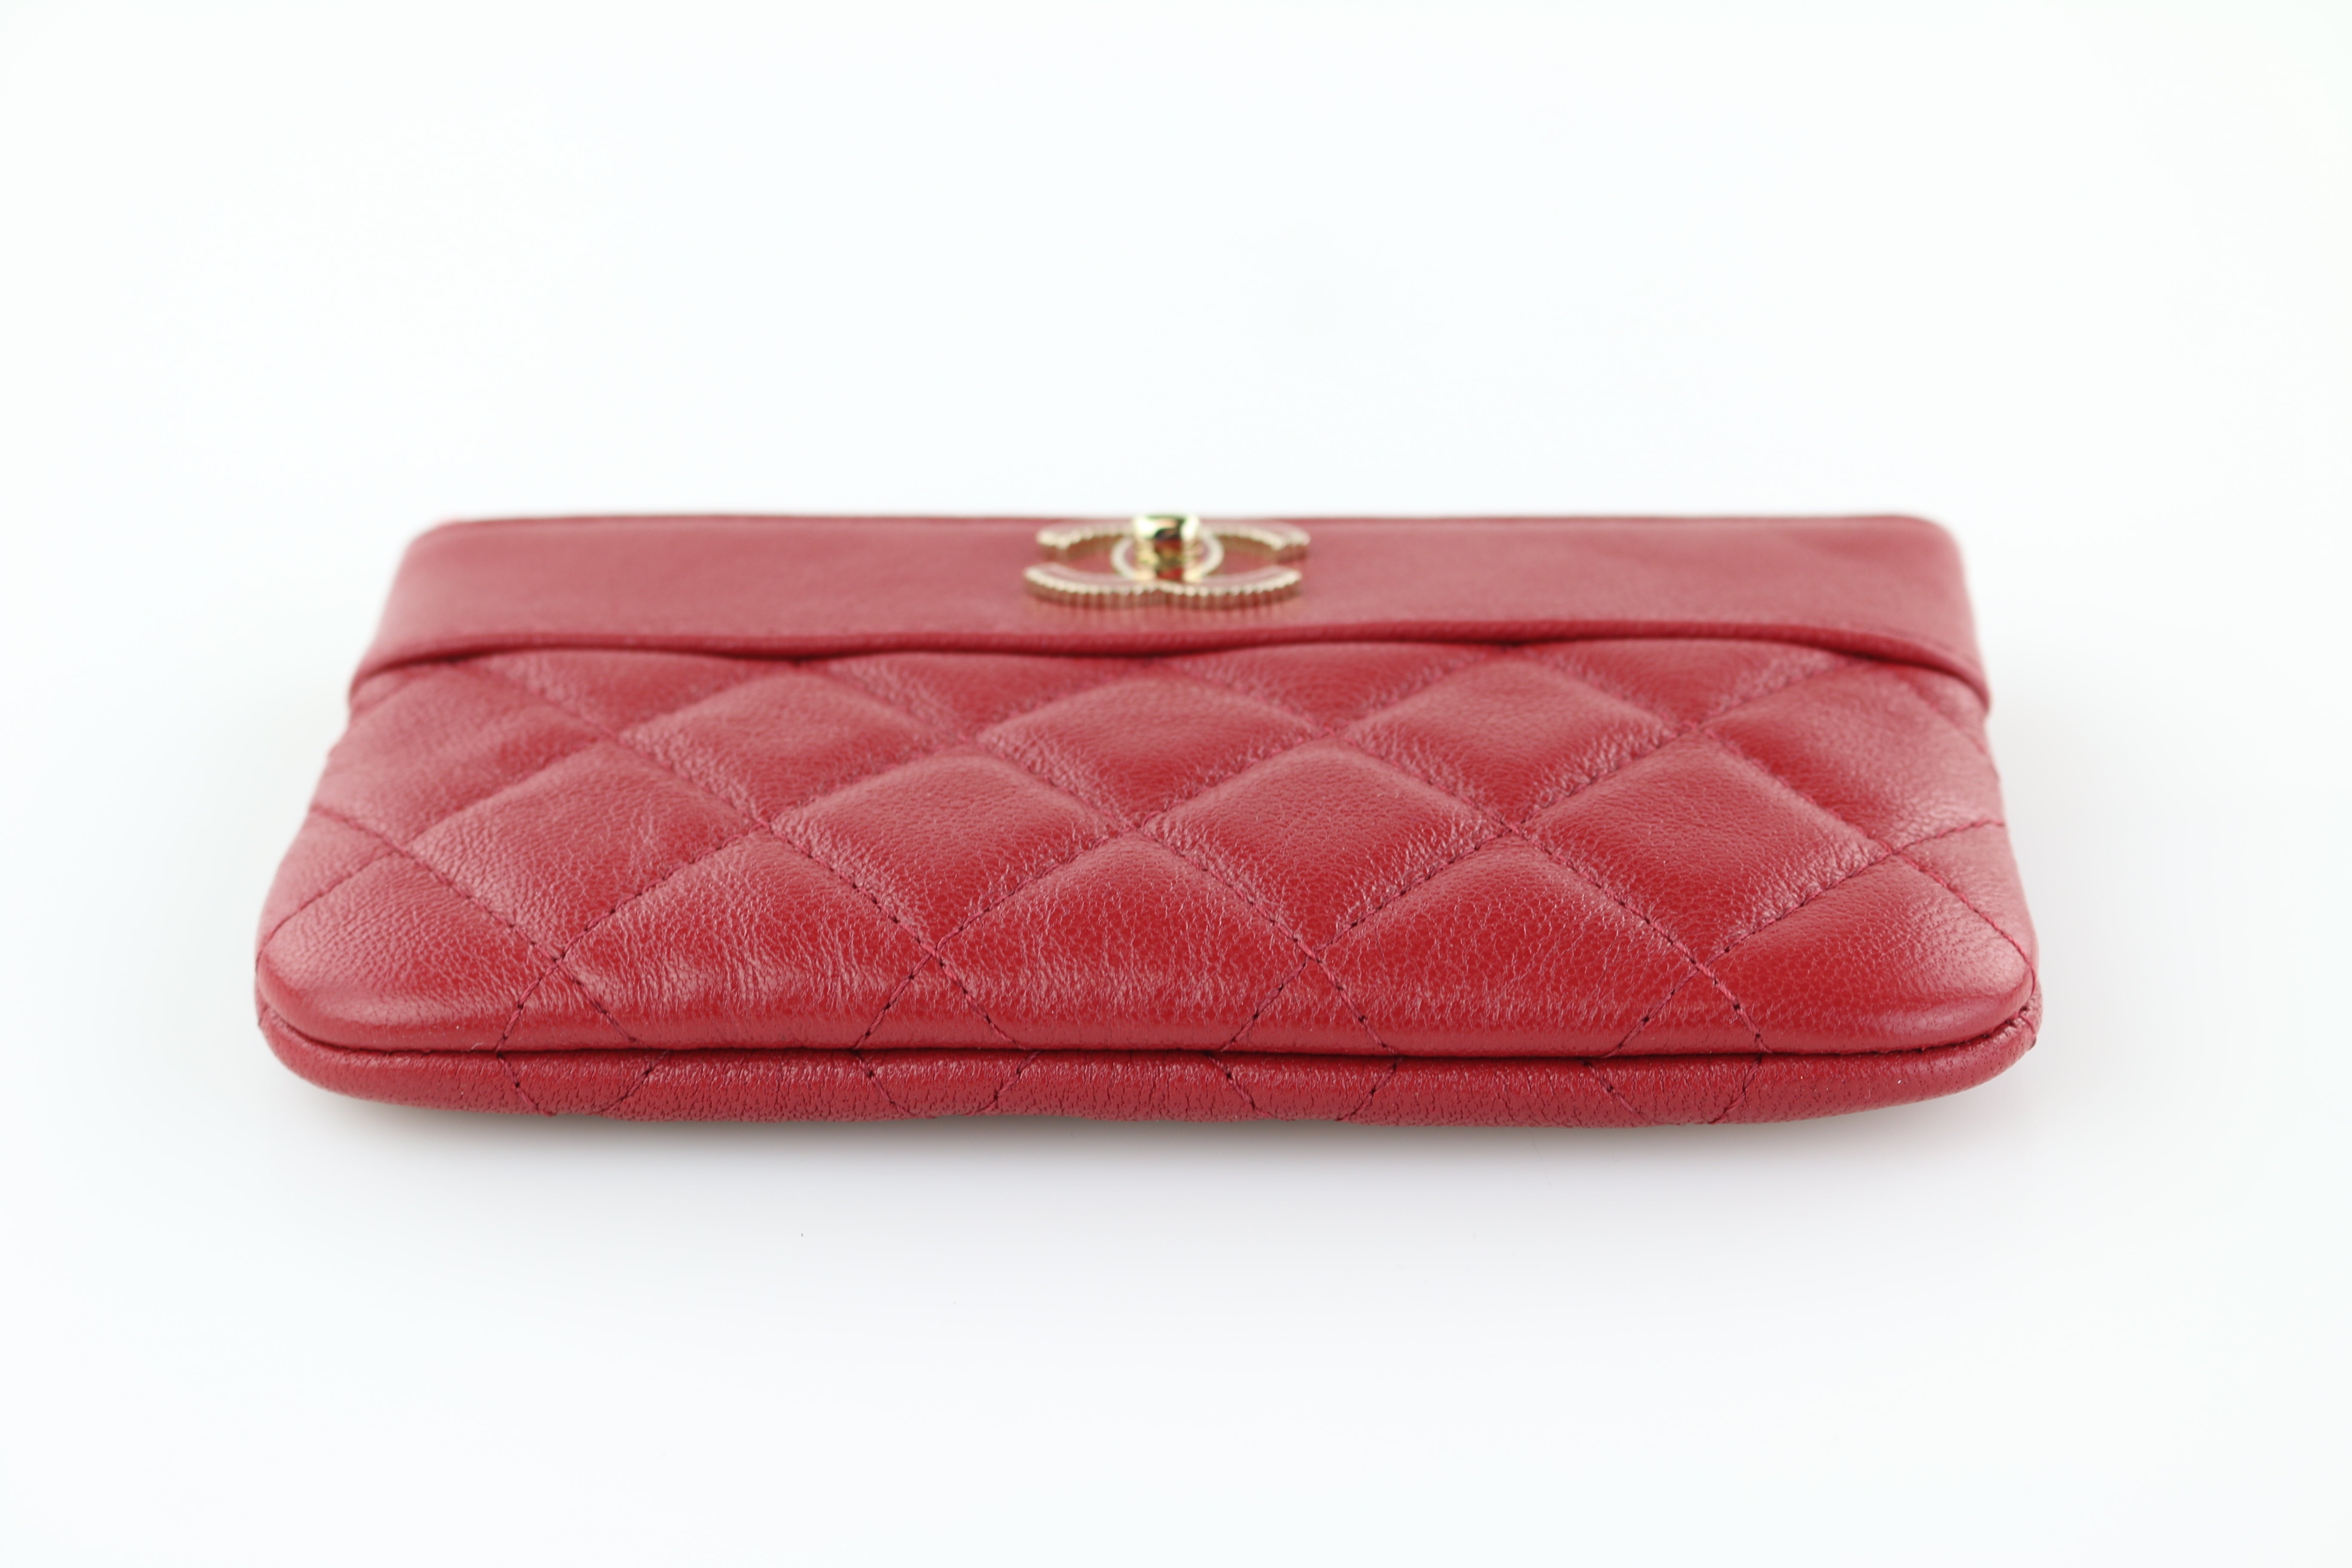 Chanel Quilted Calfskin Mademoiselle Wallet On Chain - Pink